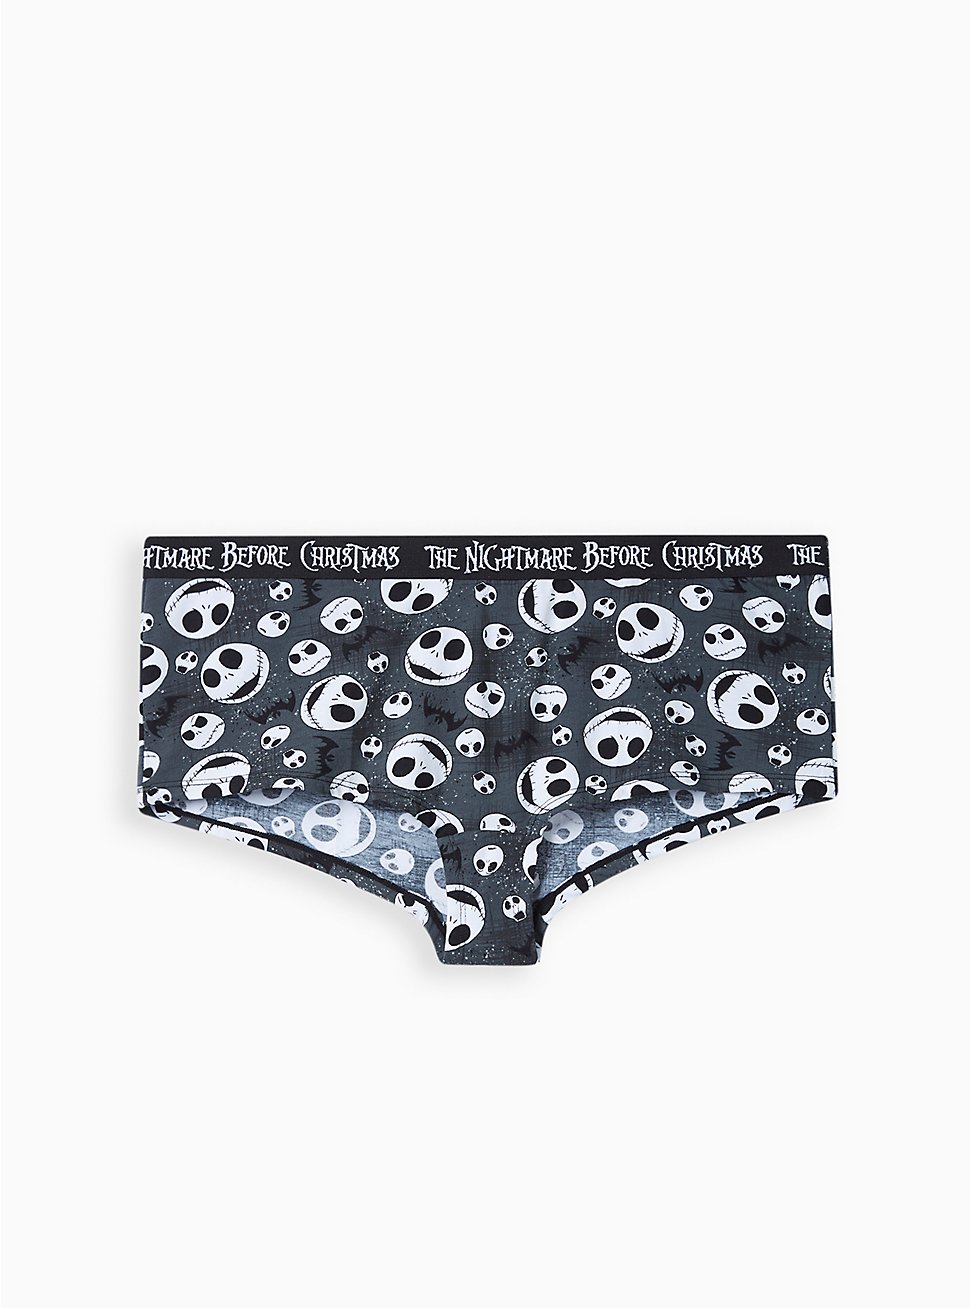 The Nightmare Before Christmas Cheeky Panty - Cotton Jack Black, MULTI, hi-res